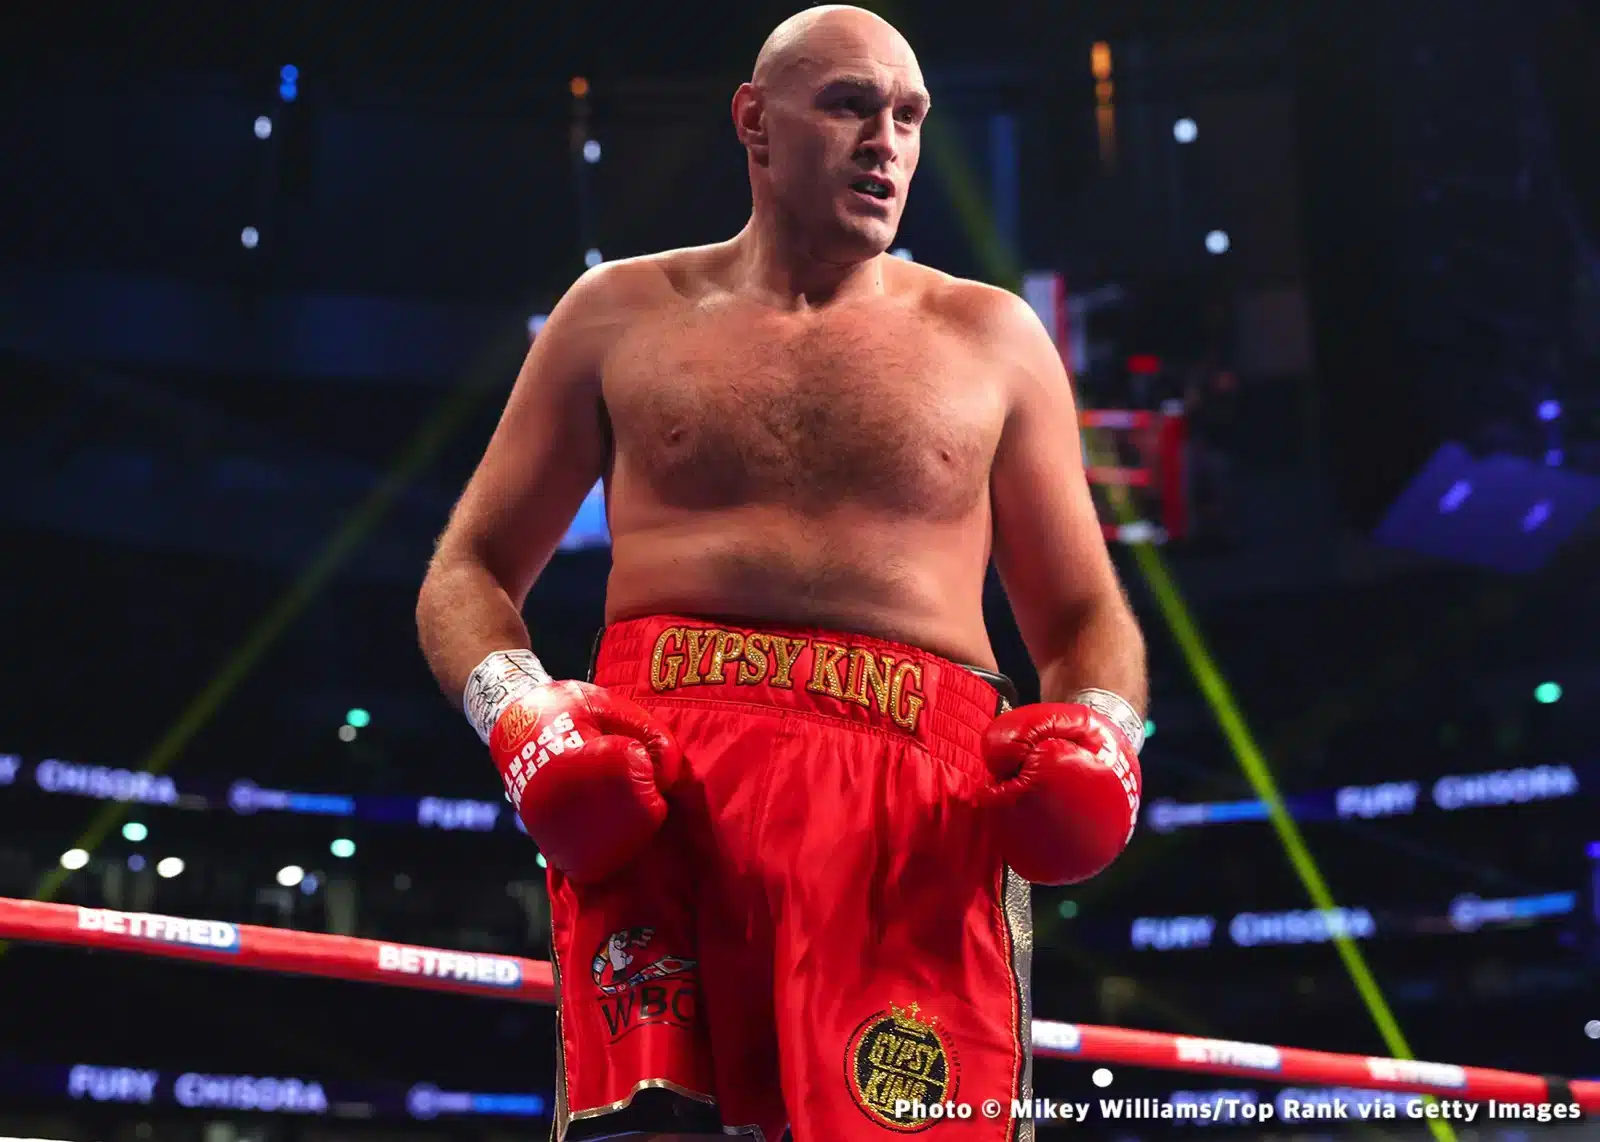 Image: Tyson Fury to "knuckle down in training," confirms Oleksandr Usyk fight is "definitely" on for April 29th